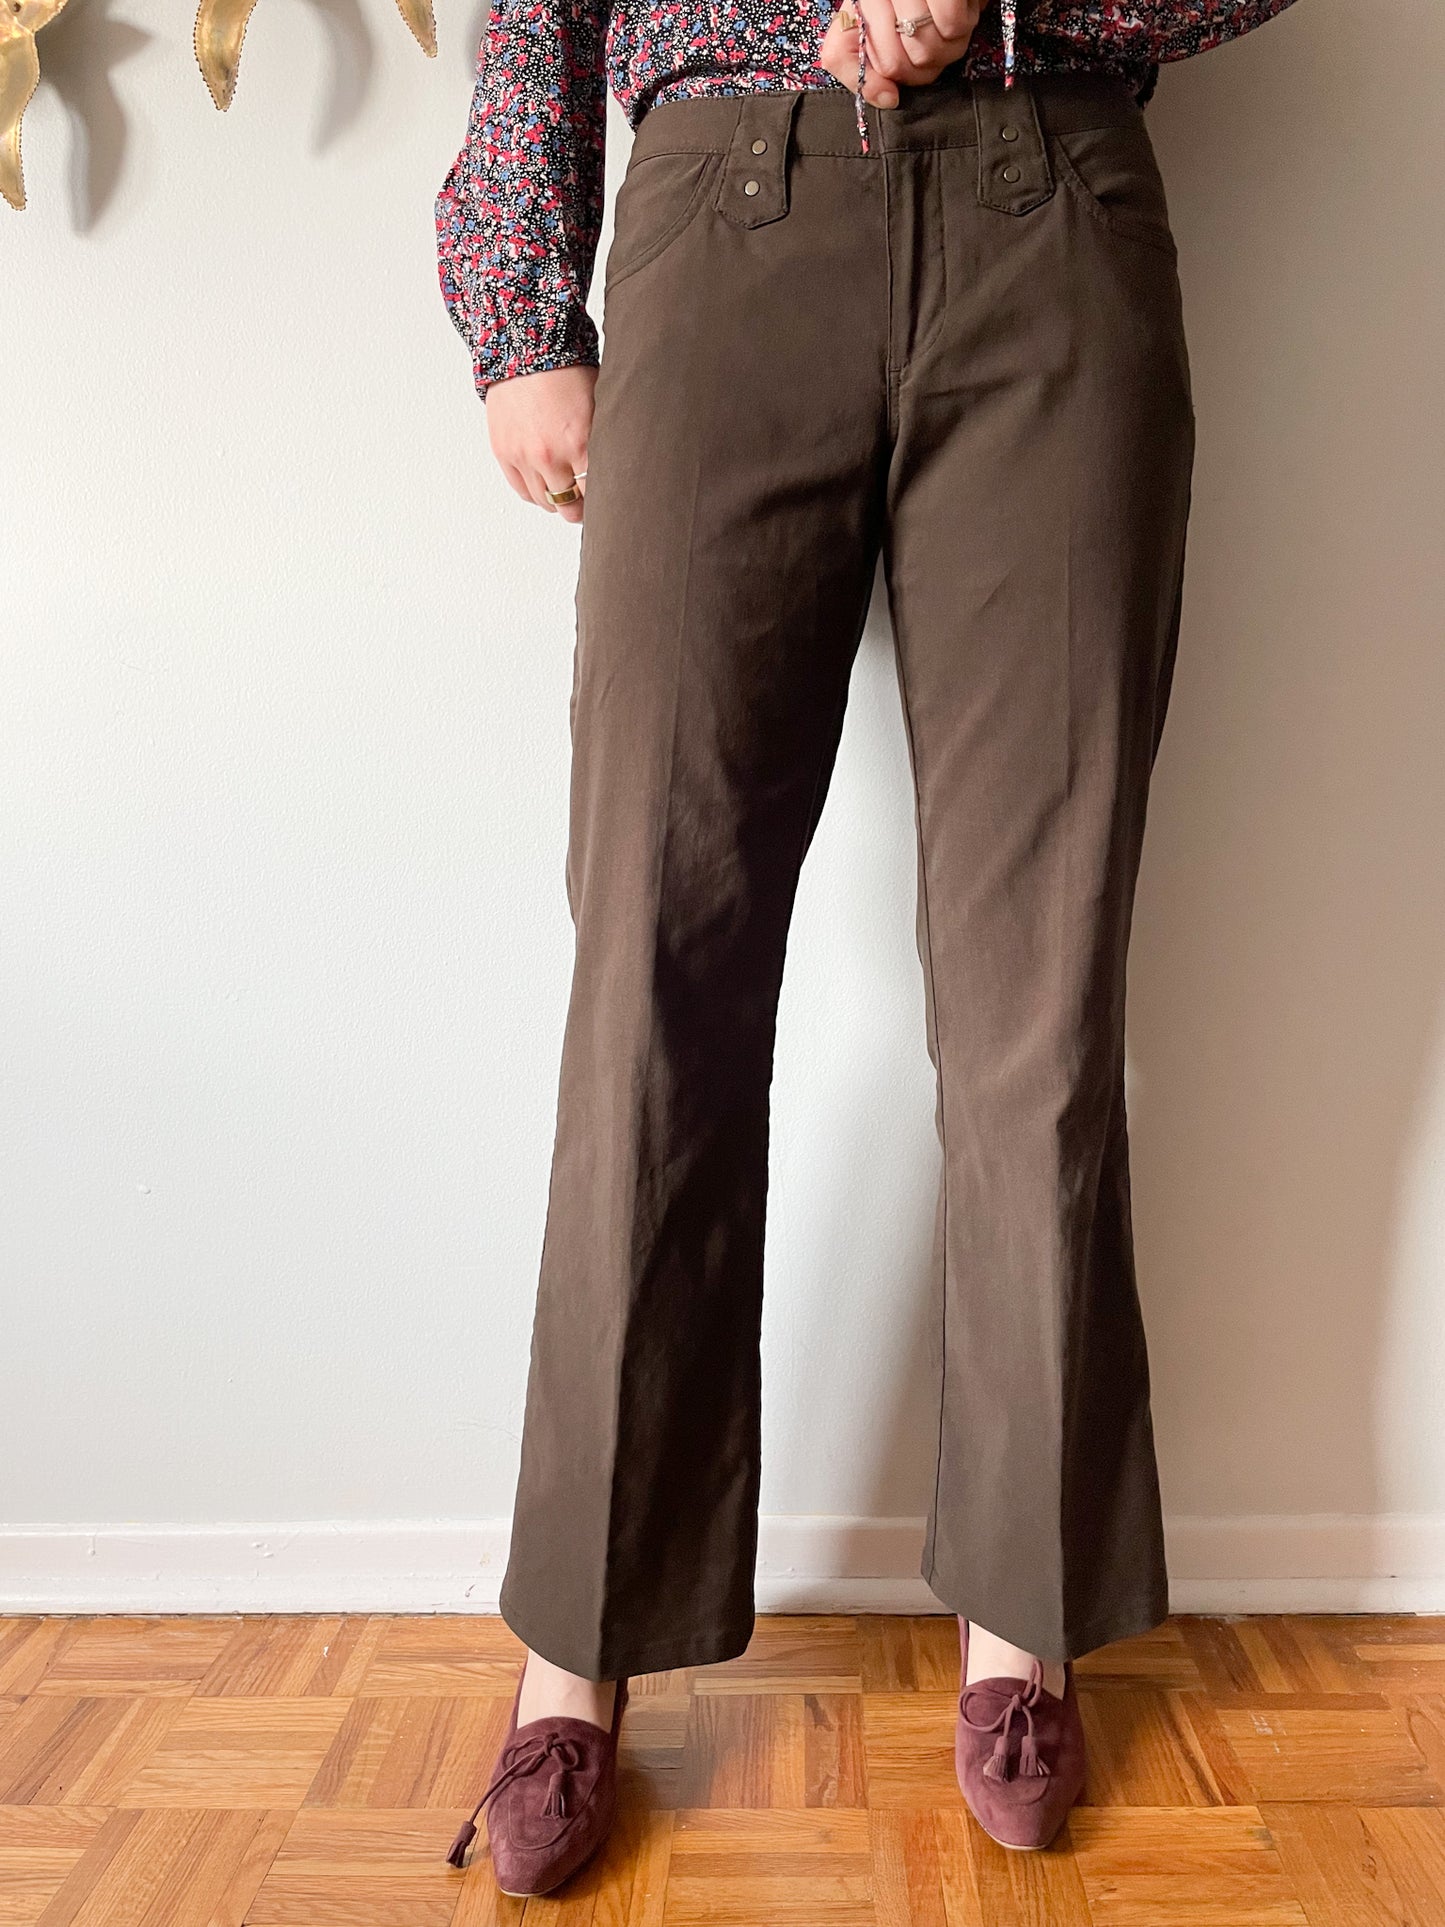 MEXX Brown Mid Rise Straight Leg Cotton Blend Cropped Trouser Pants - Small